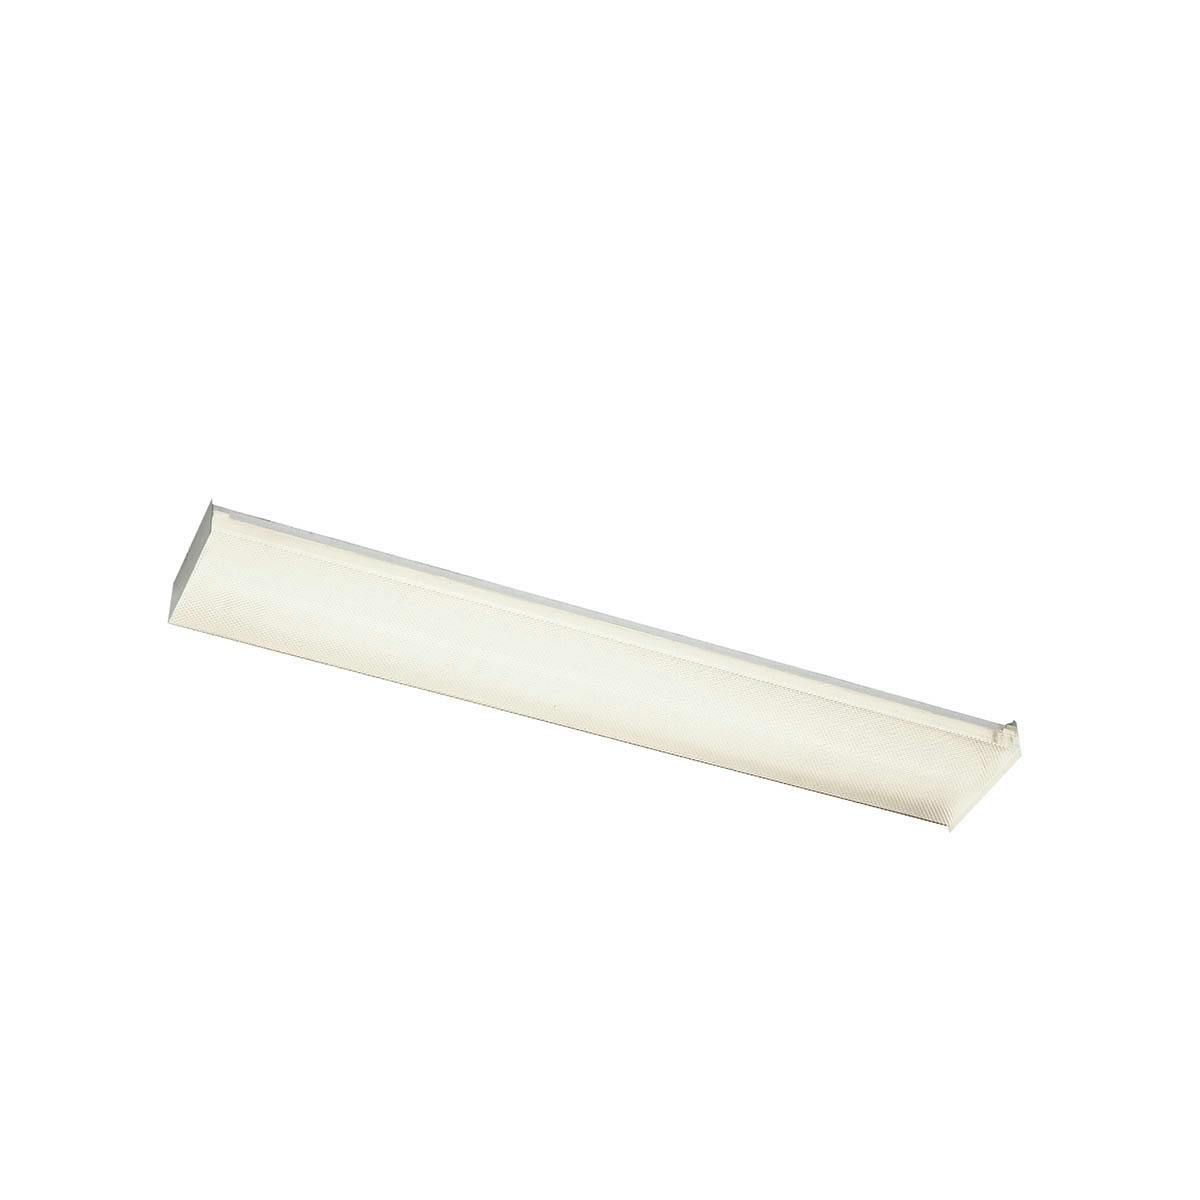 48" Fluorescent Ceiling Light White on a white background